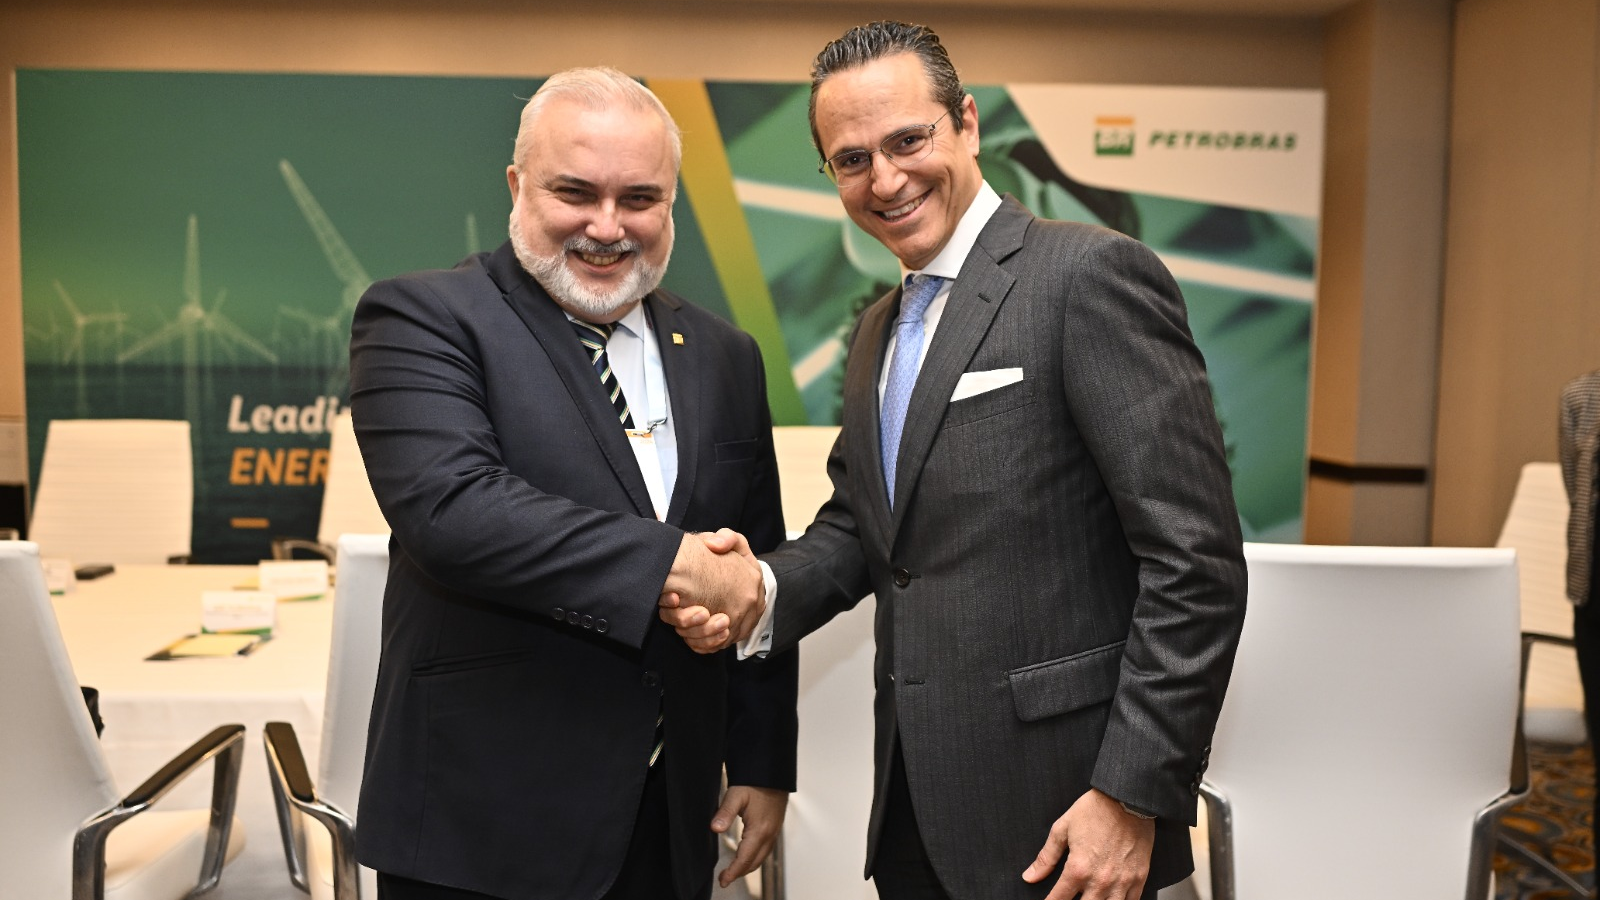 Petrobras President, Jean Paul Prates, and Shell CEO, Wael Sawan, were together at CERAWeek, in Houston